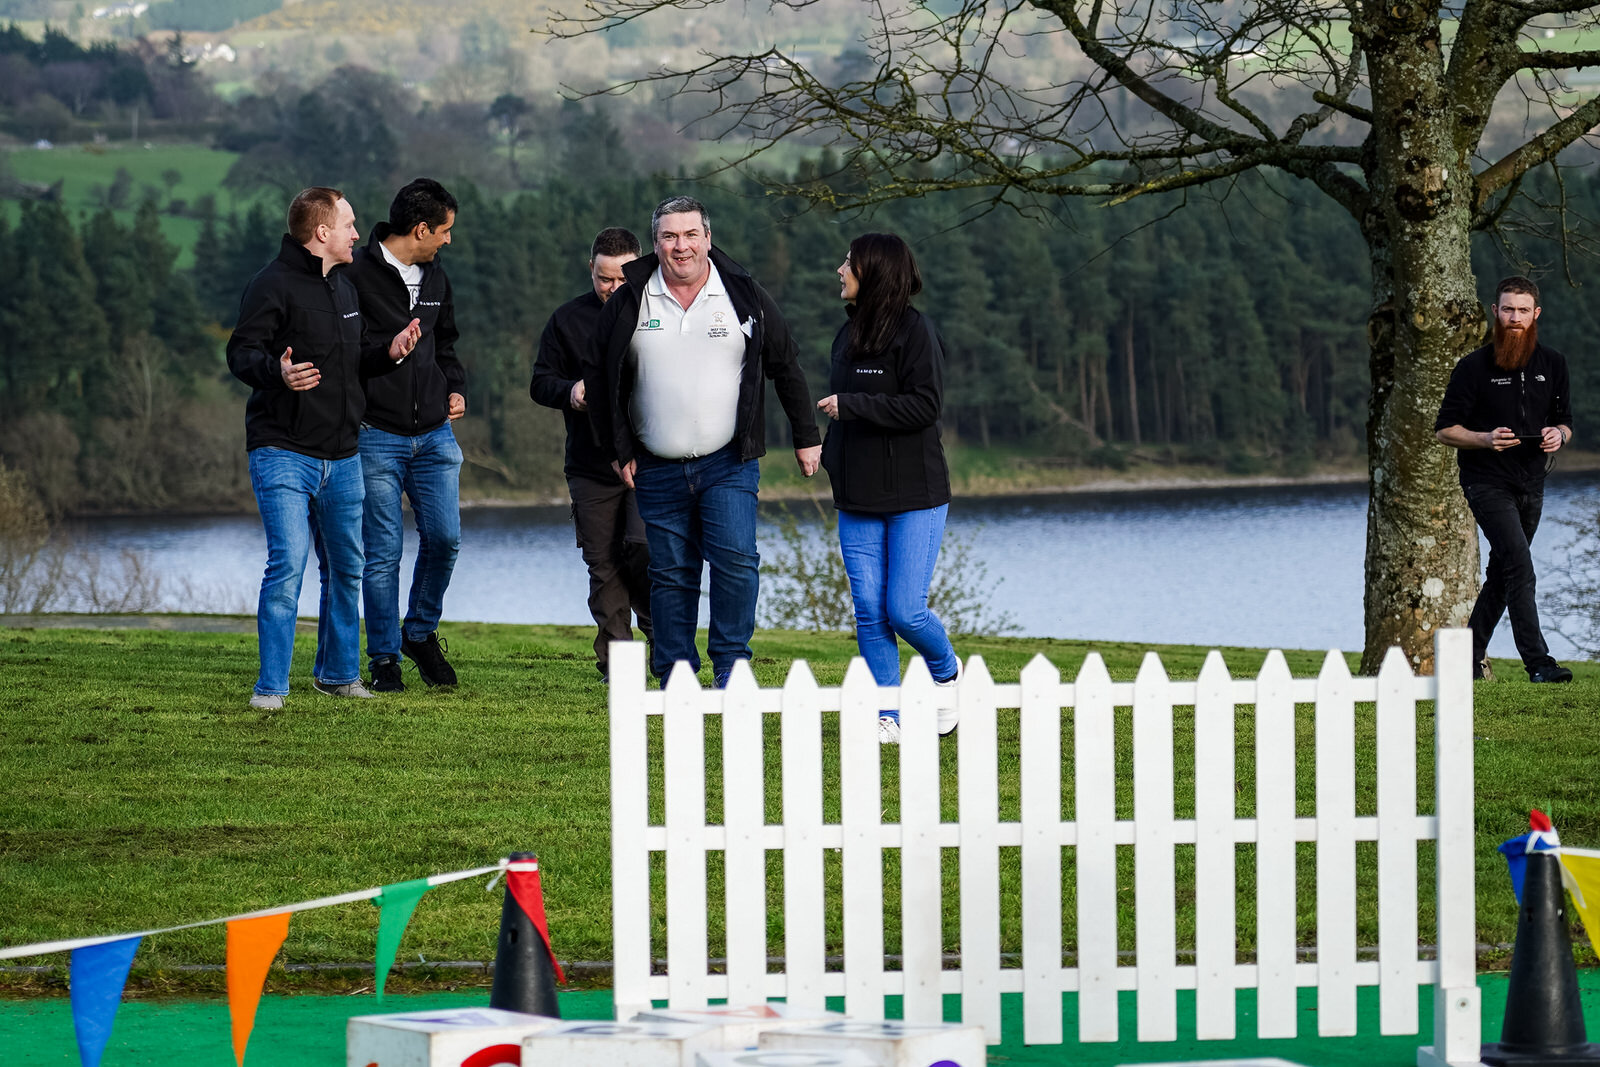  Team building corporate event photography Dublin Wicklow Ireland by photographer Roger Kenny 